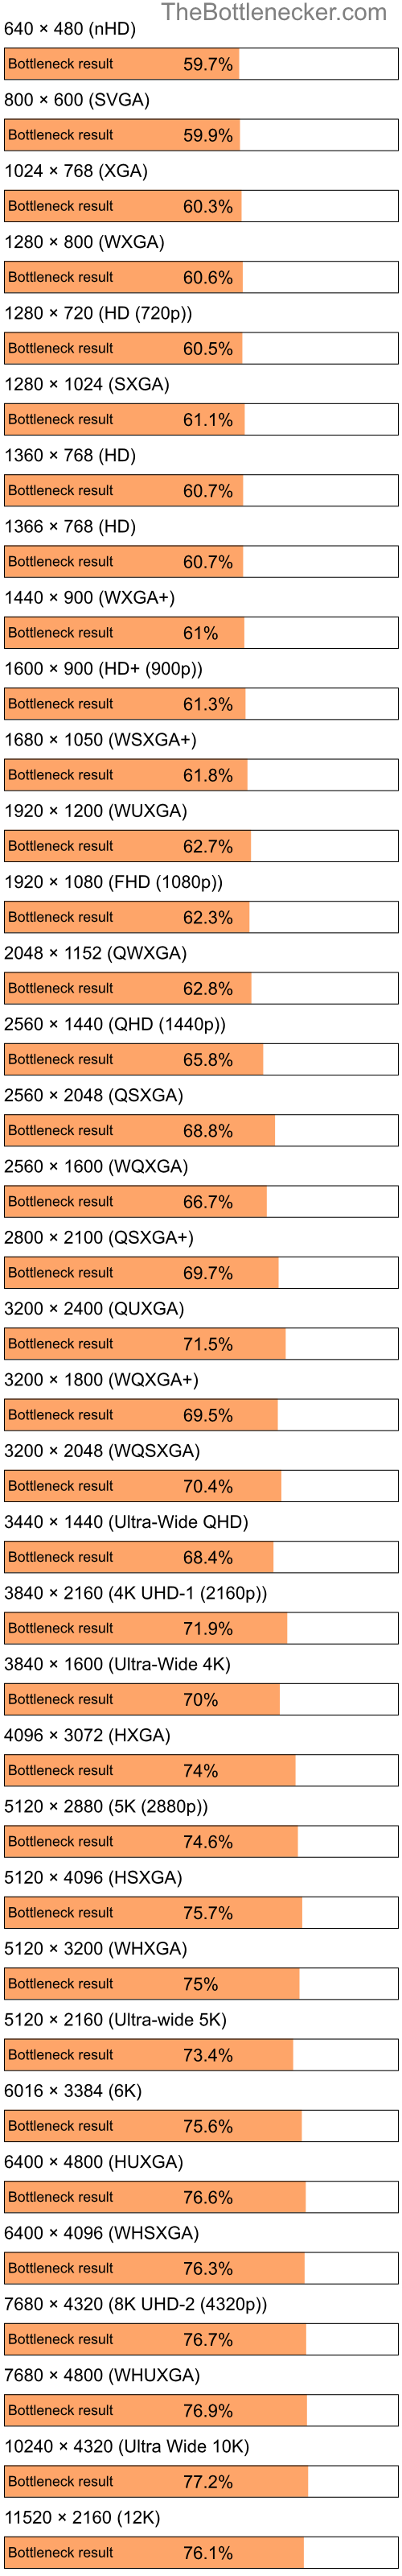 Bottleneck results by resolution for Intel Celeron and NVIDIA Quadro NVS 140M in Processor Intense Tasks